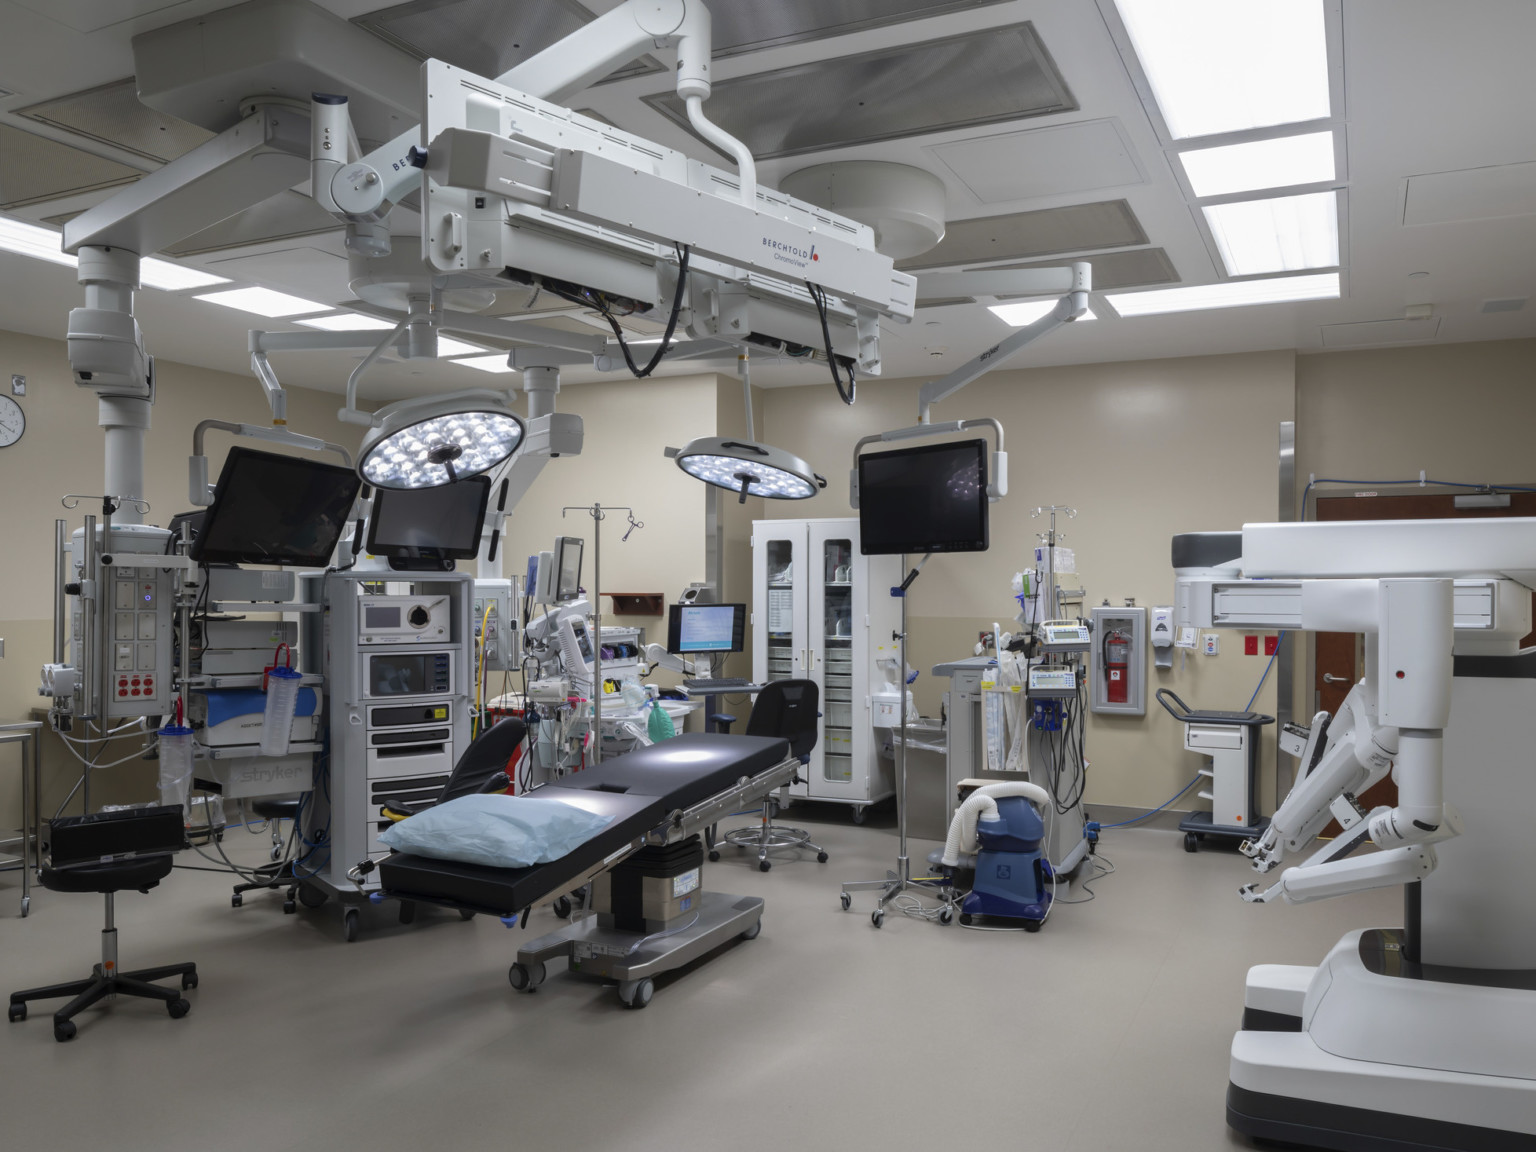 Spacious operating room interior with equipment along walls and suspended above